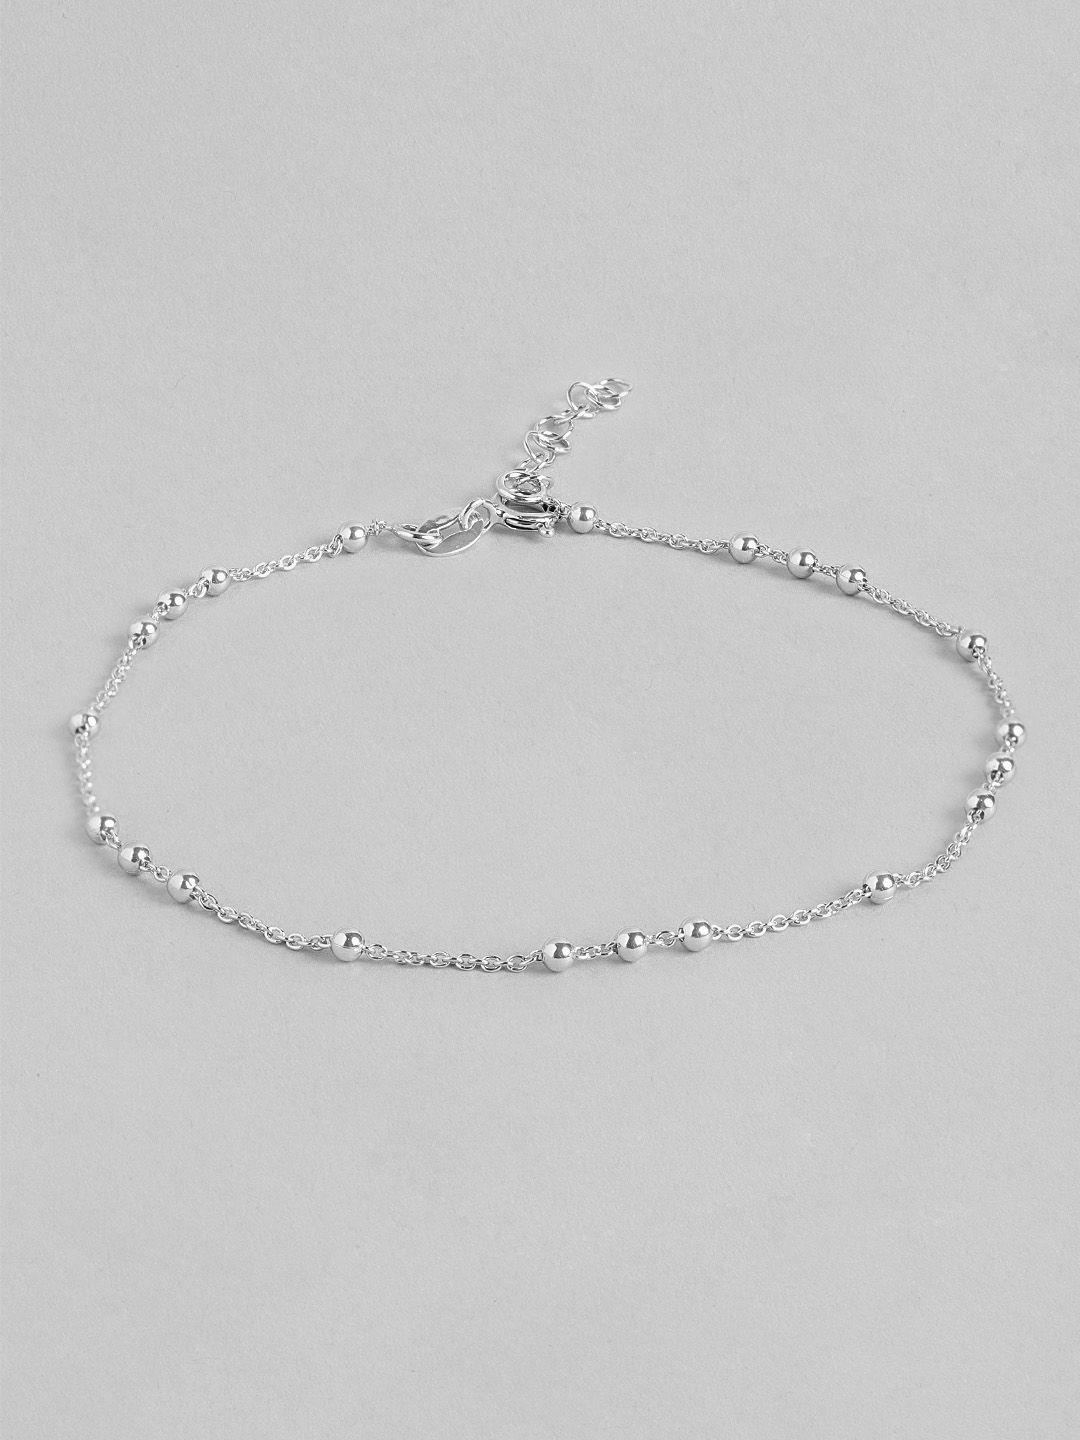 carlton london  women rhodium-plated 925 sterling silver adjustable anklet